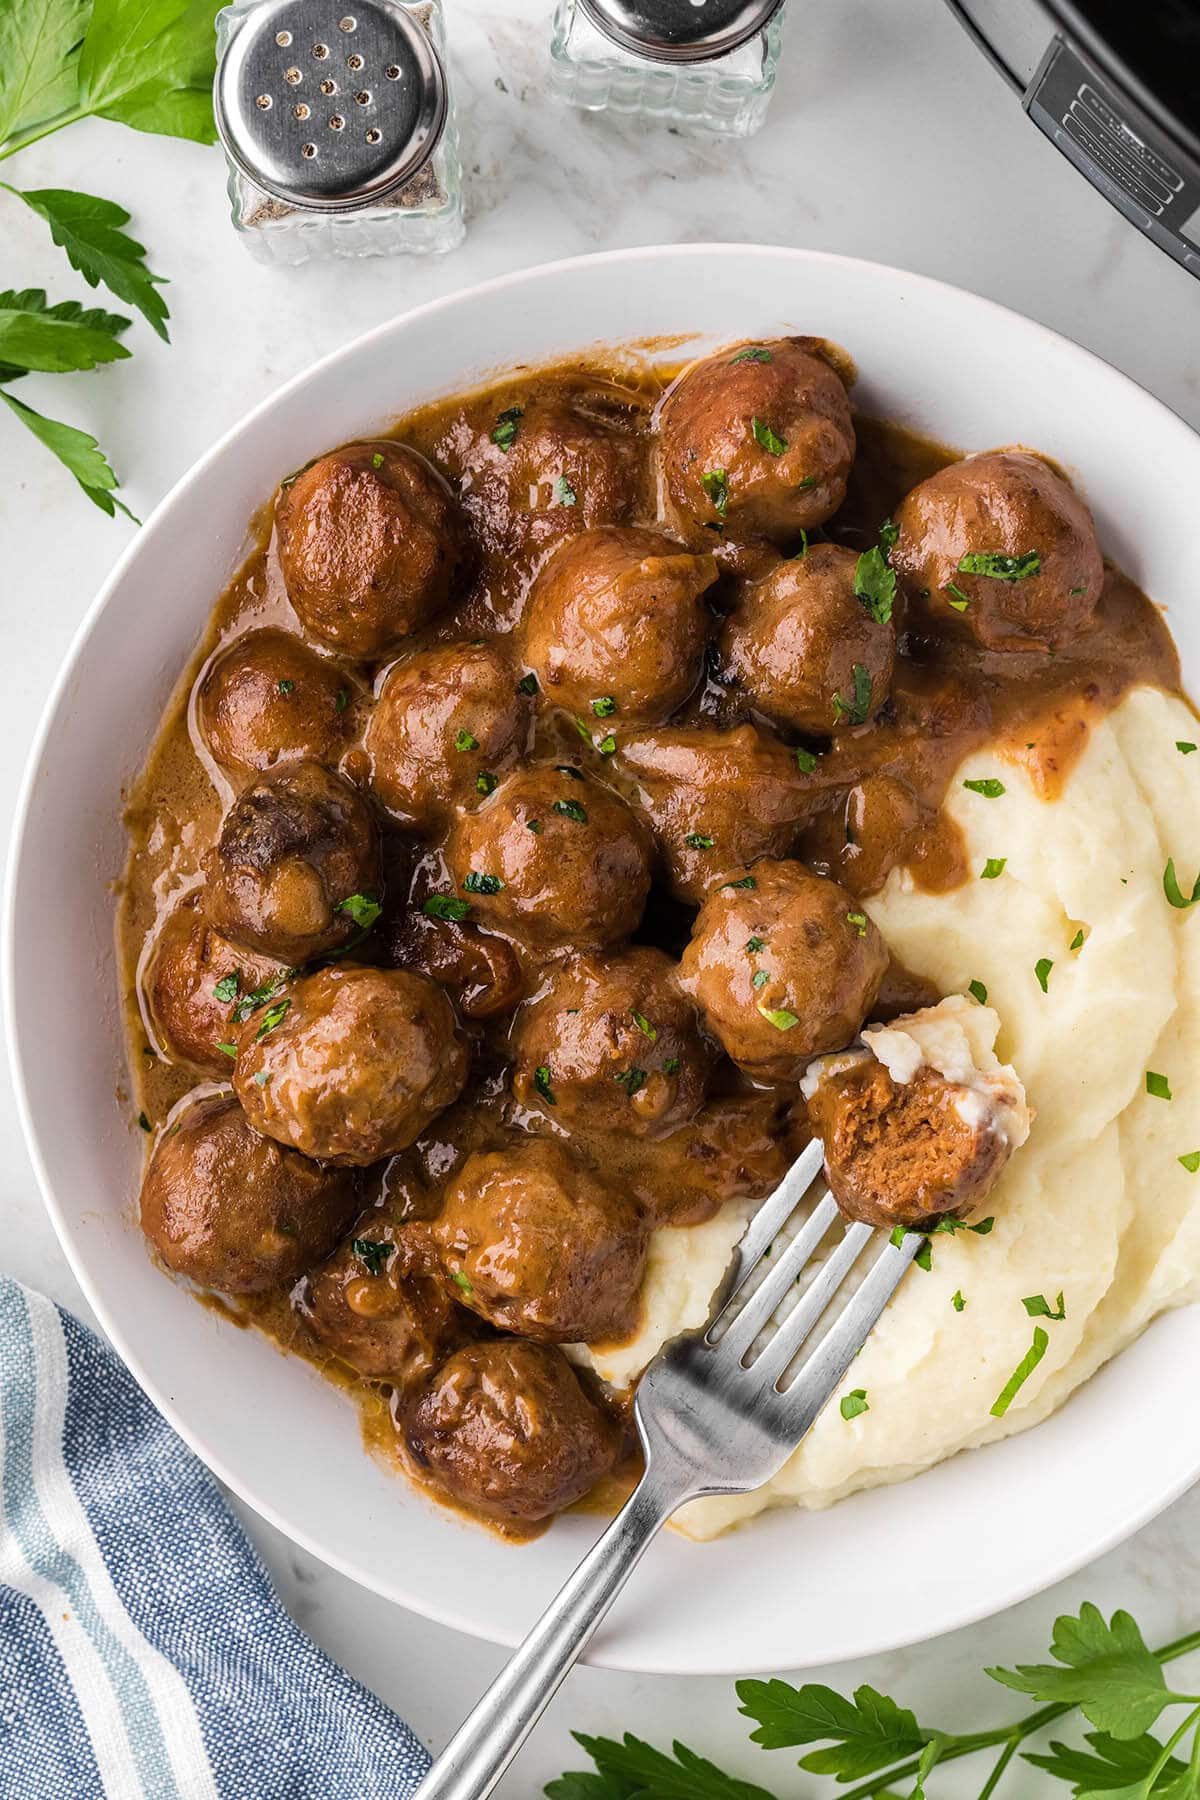 Saucy meatballs and gravy over mashed potatoes on a plate with a fork.